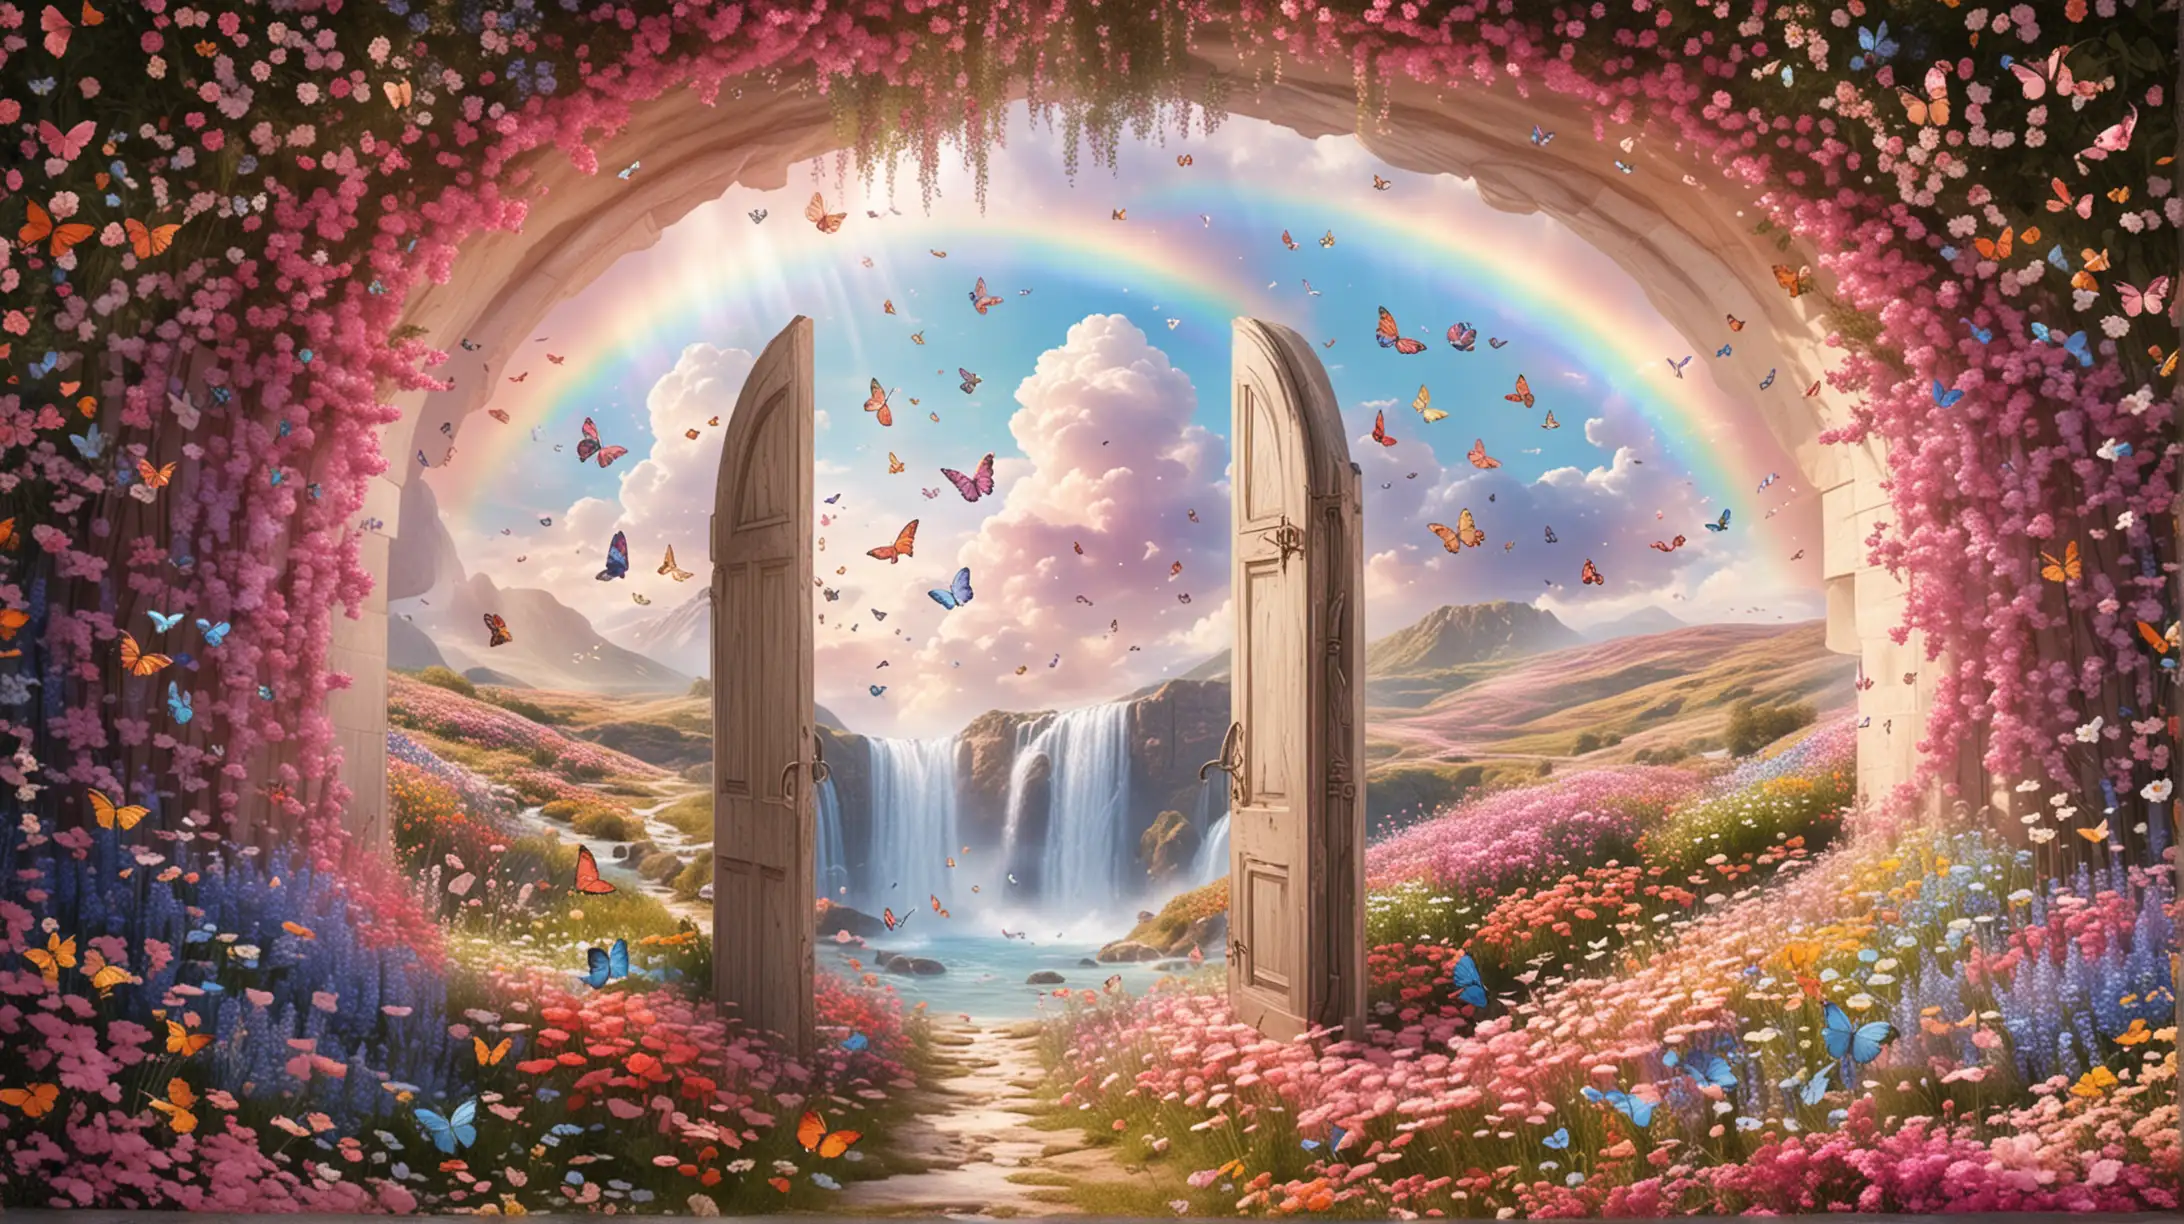 a waterfall in a flower field parting like two large doors opening, revealing a pastel rainbow heaven, with butterflies, fairies, and magical creatures flying around